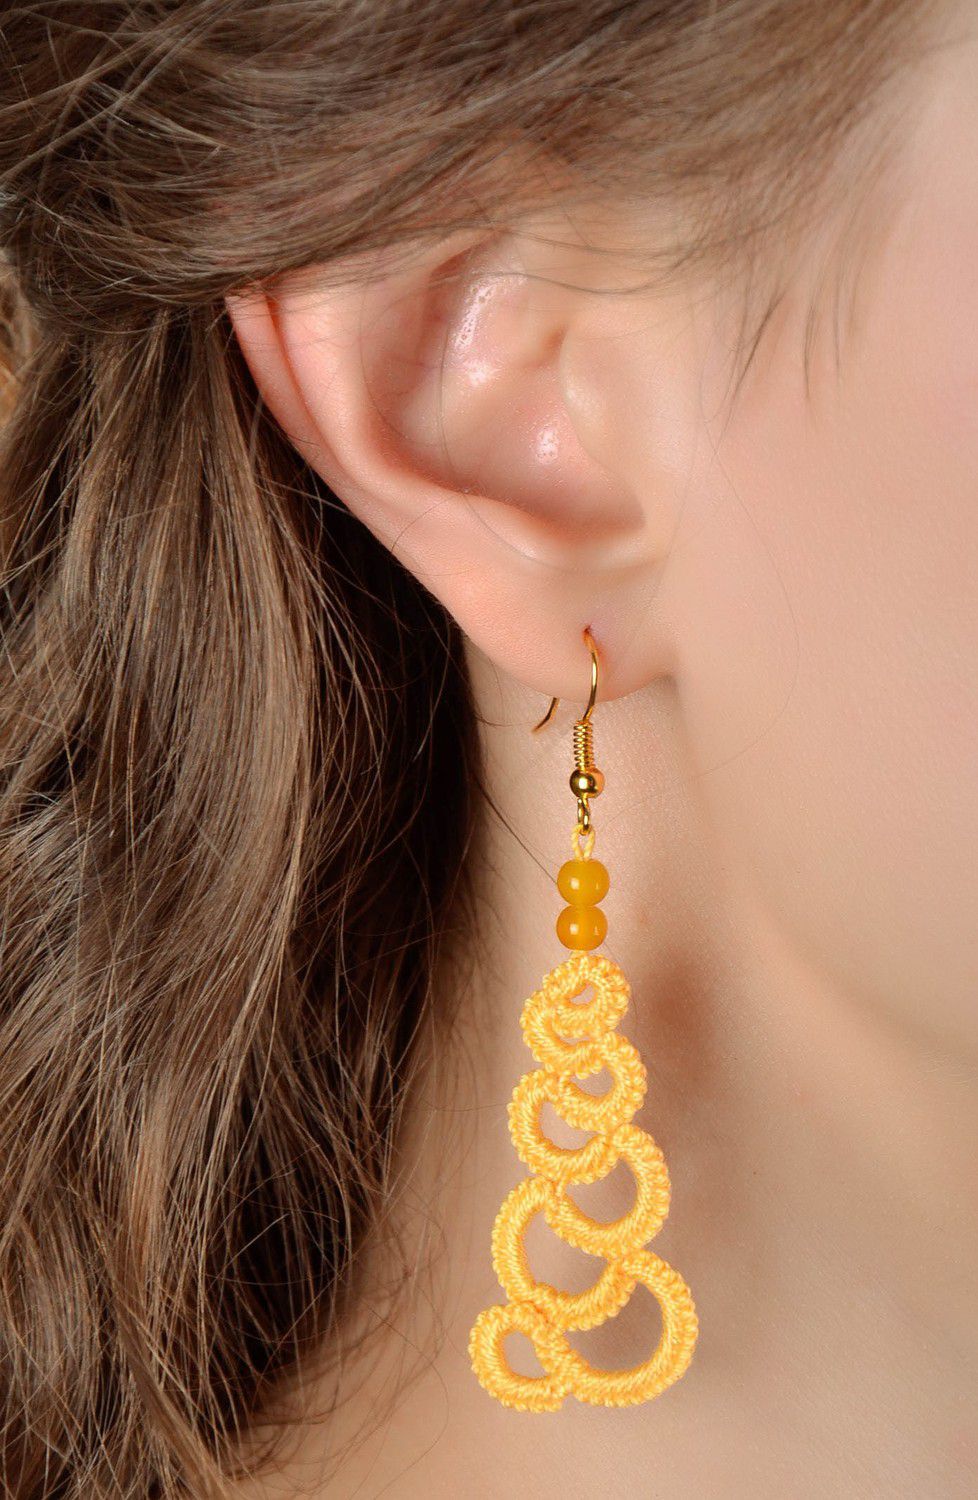 Orange earrings made from woven lace photo 4